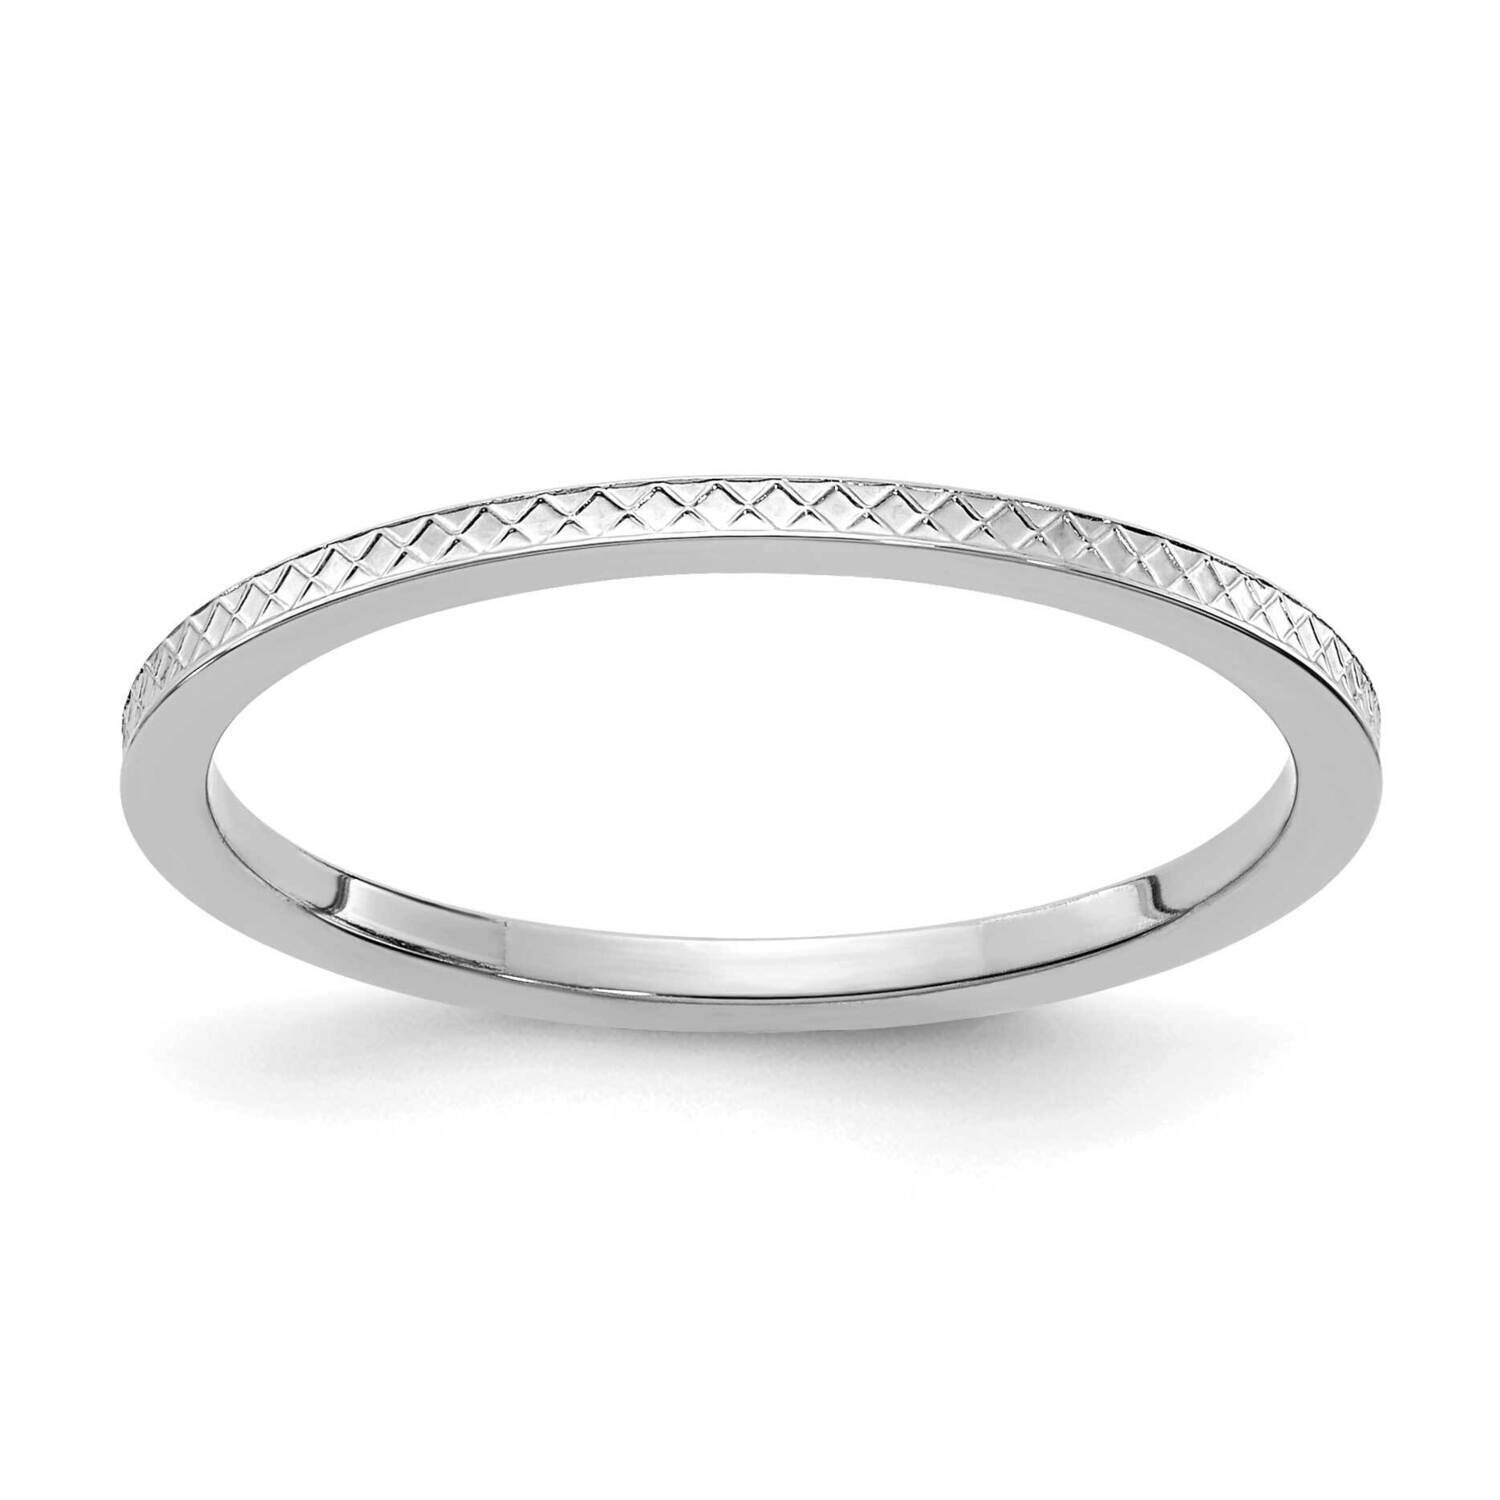 1.2mm Criss-Cross Pattern Stackable Band 10k White Gold 1STK20-120W